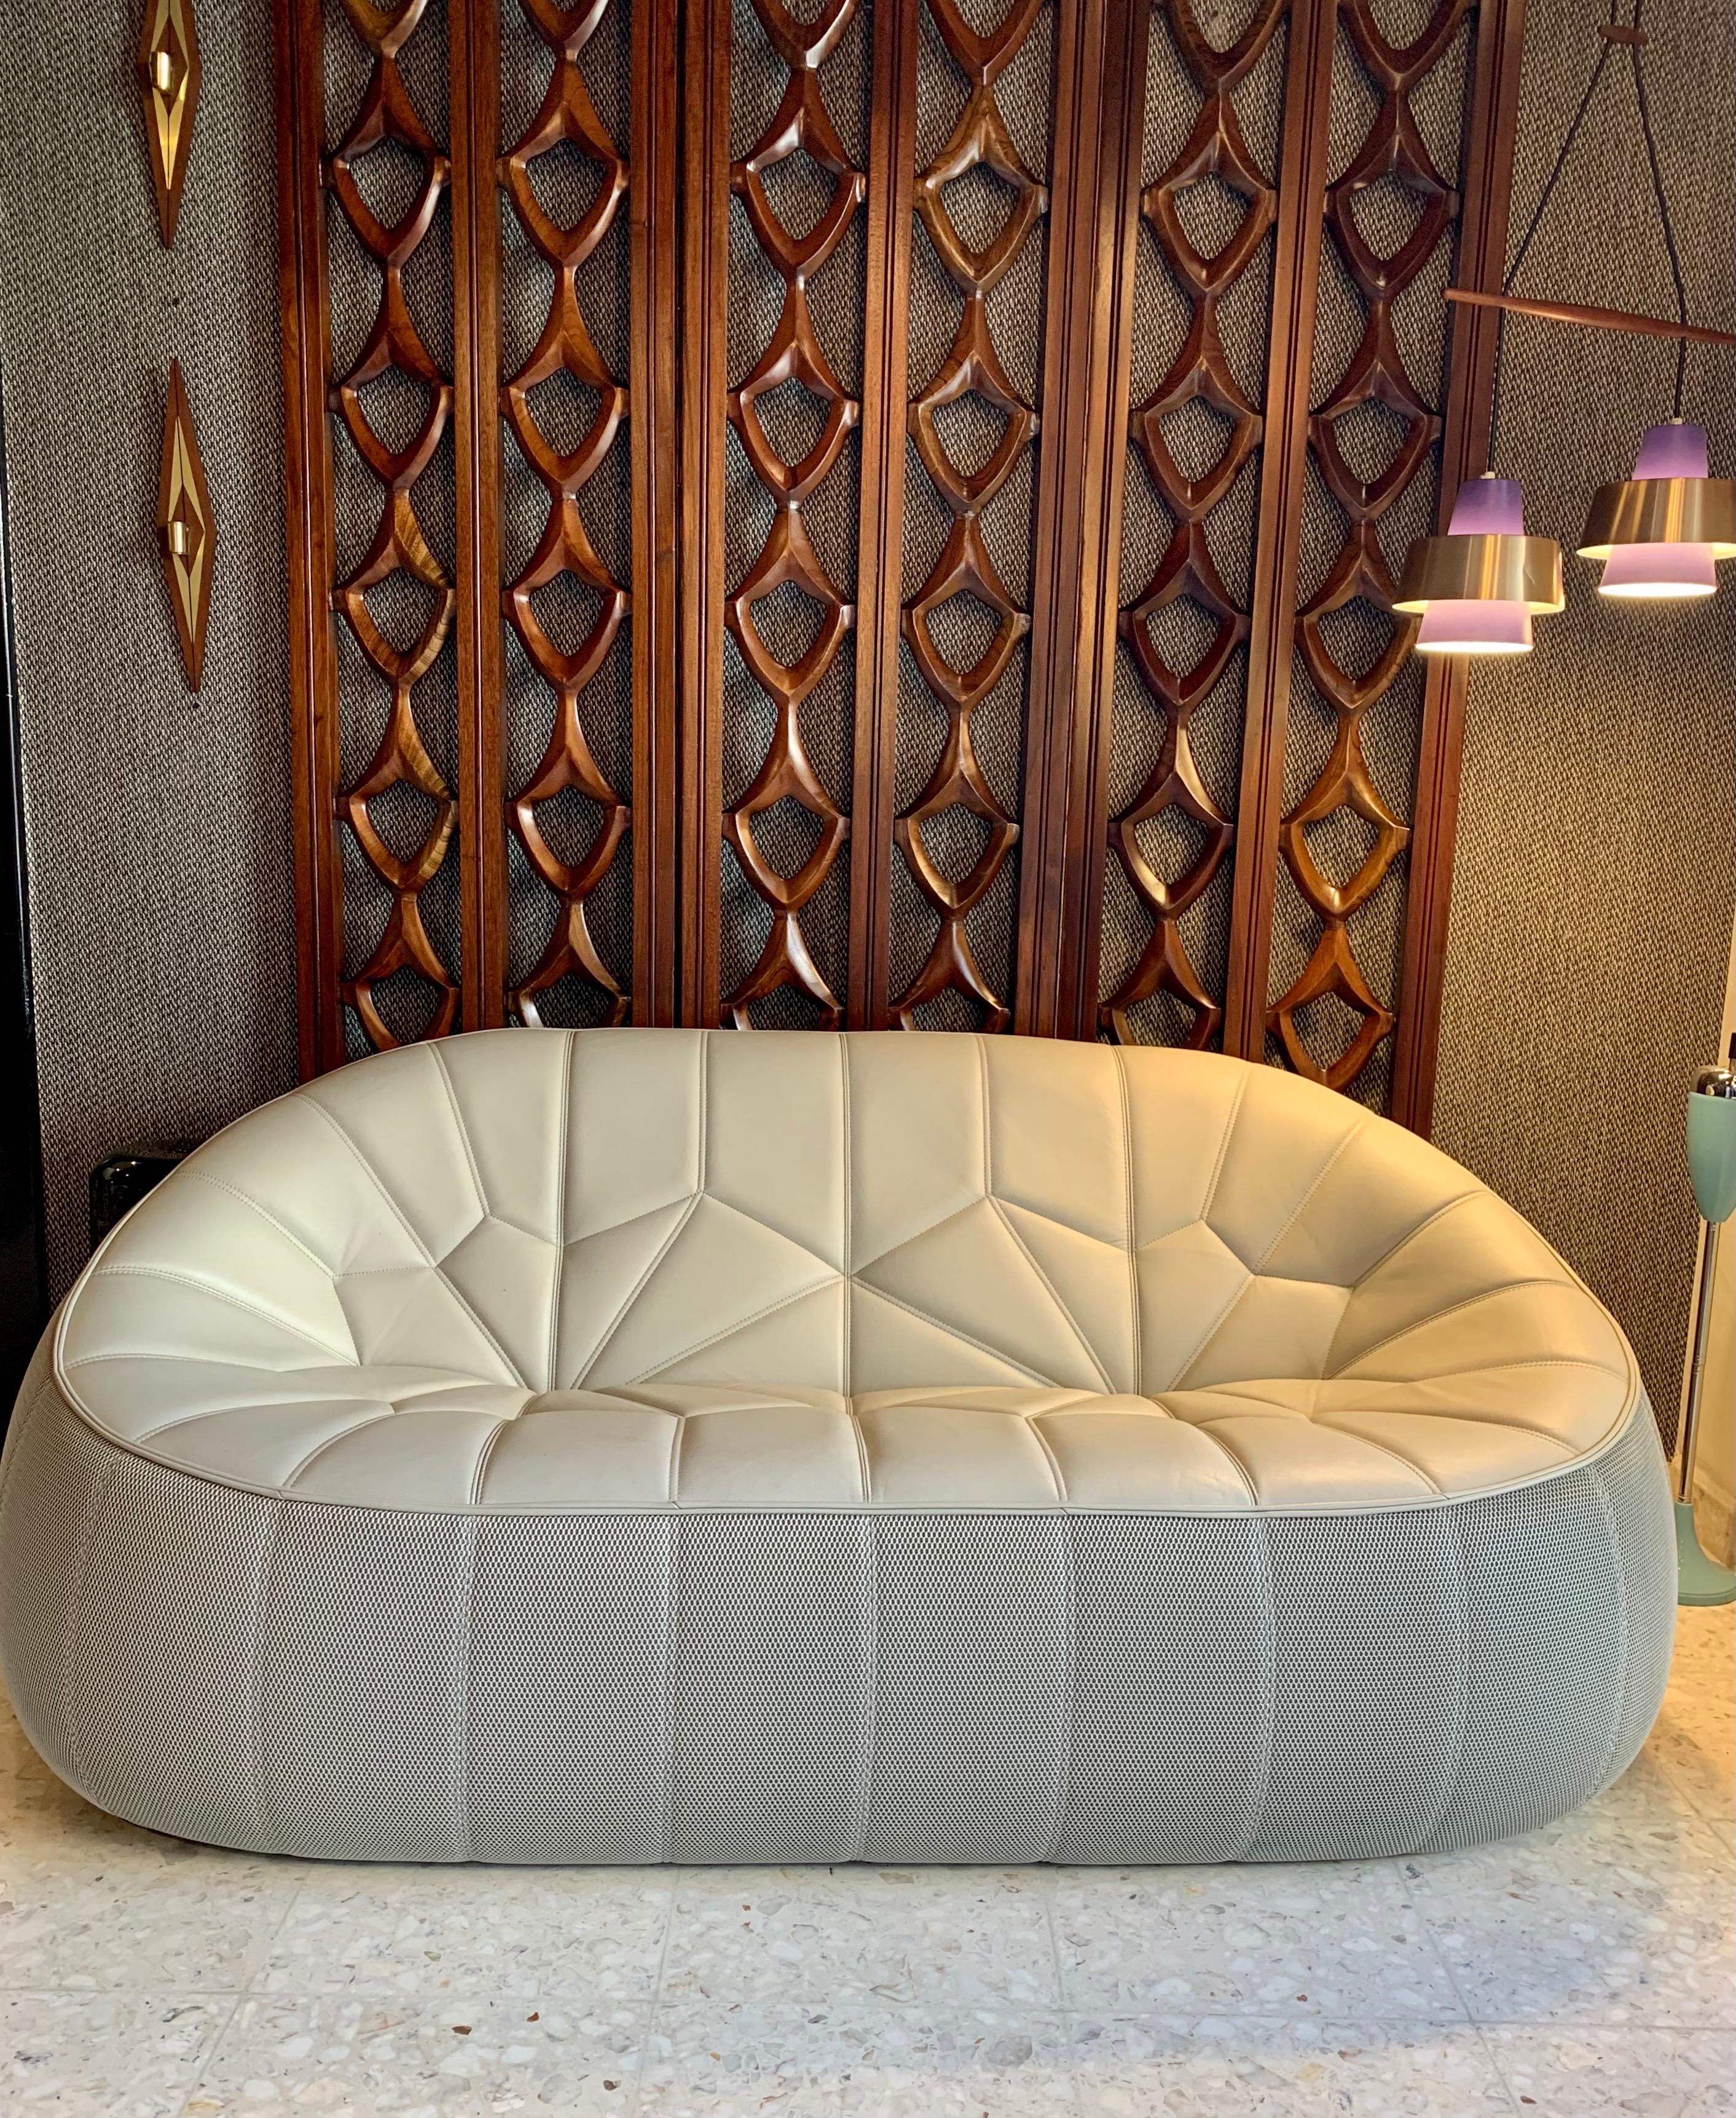 Model inspired by the traditional Moroccan footstool, made in France by the international firm 